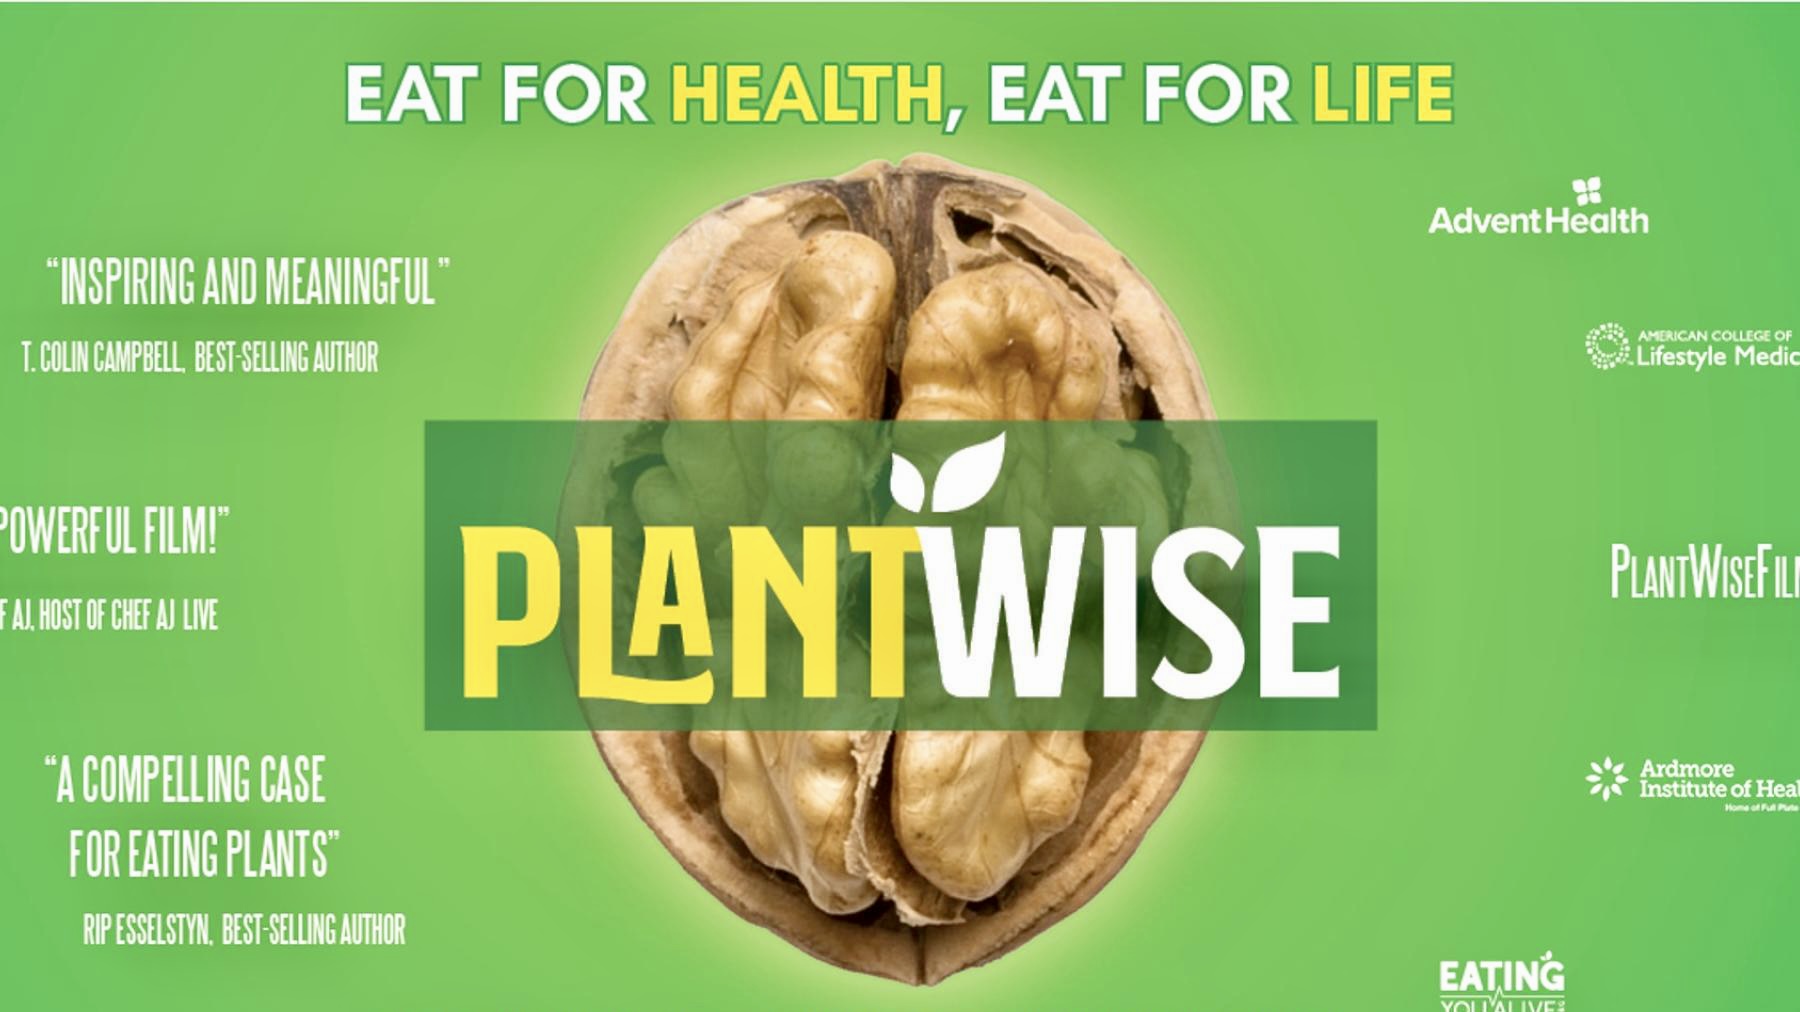 NEW DOCUMENTARY SHOWS HOW A PLANT-BASED DIET CAN SOLVE SOME CHRONIC HEALTH CONDITIONS